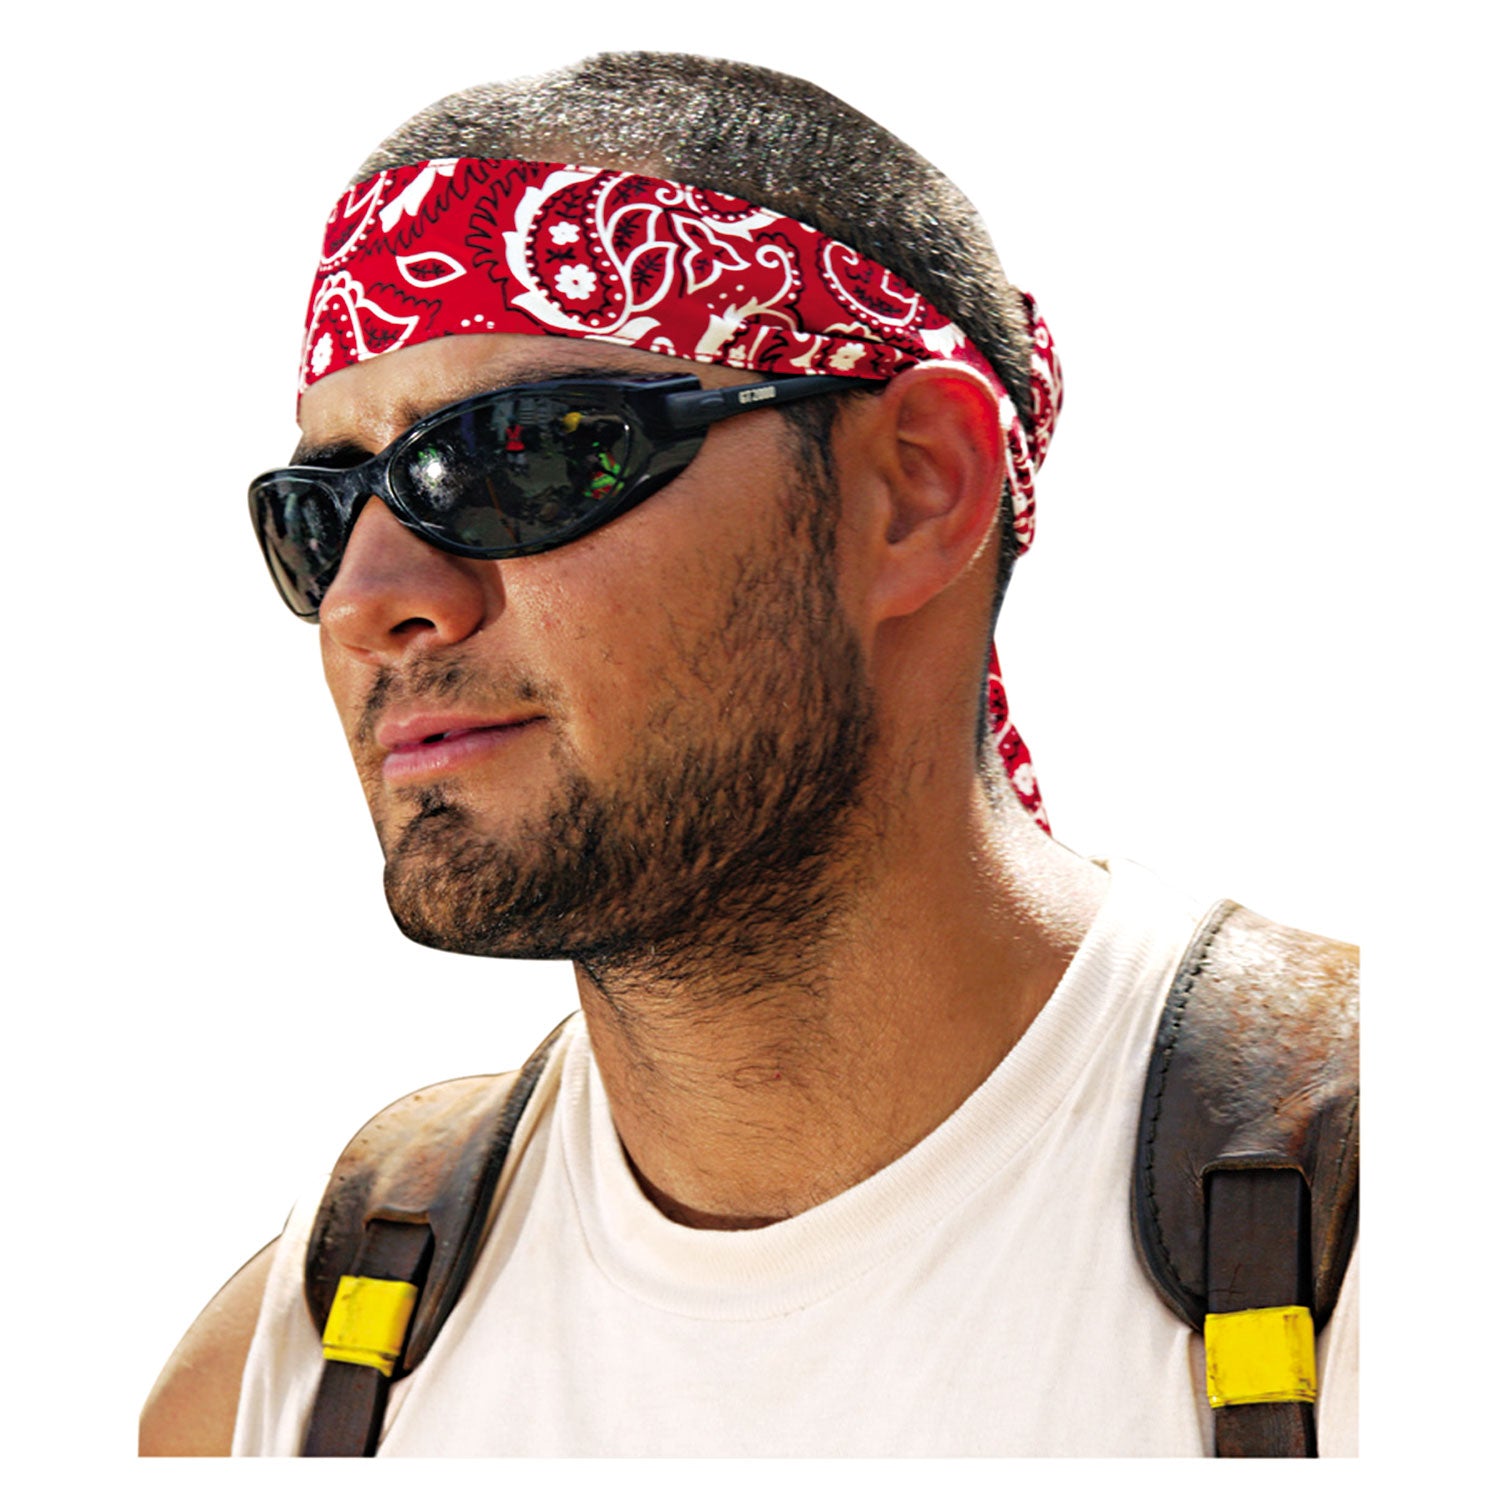 chill-its-6700-6705-bandana-headband-one-size-fits-all-red-western_ego12305 - 1